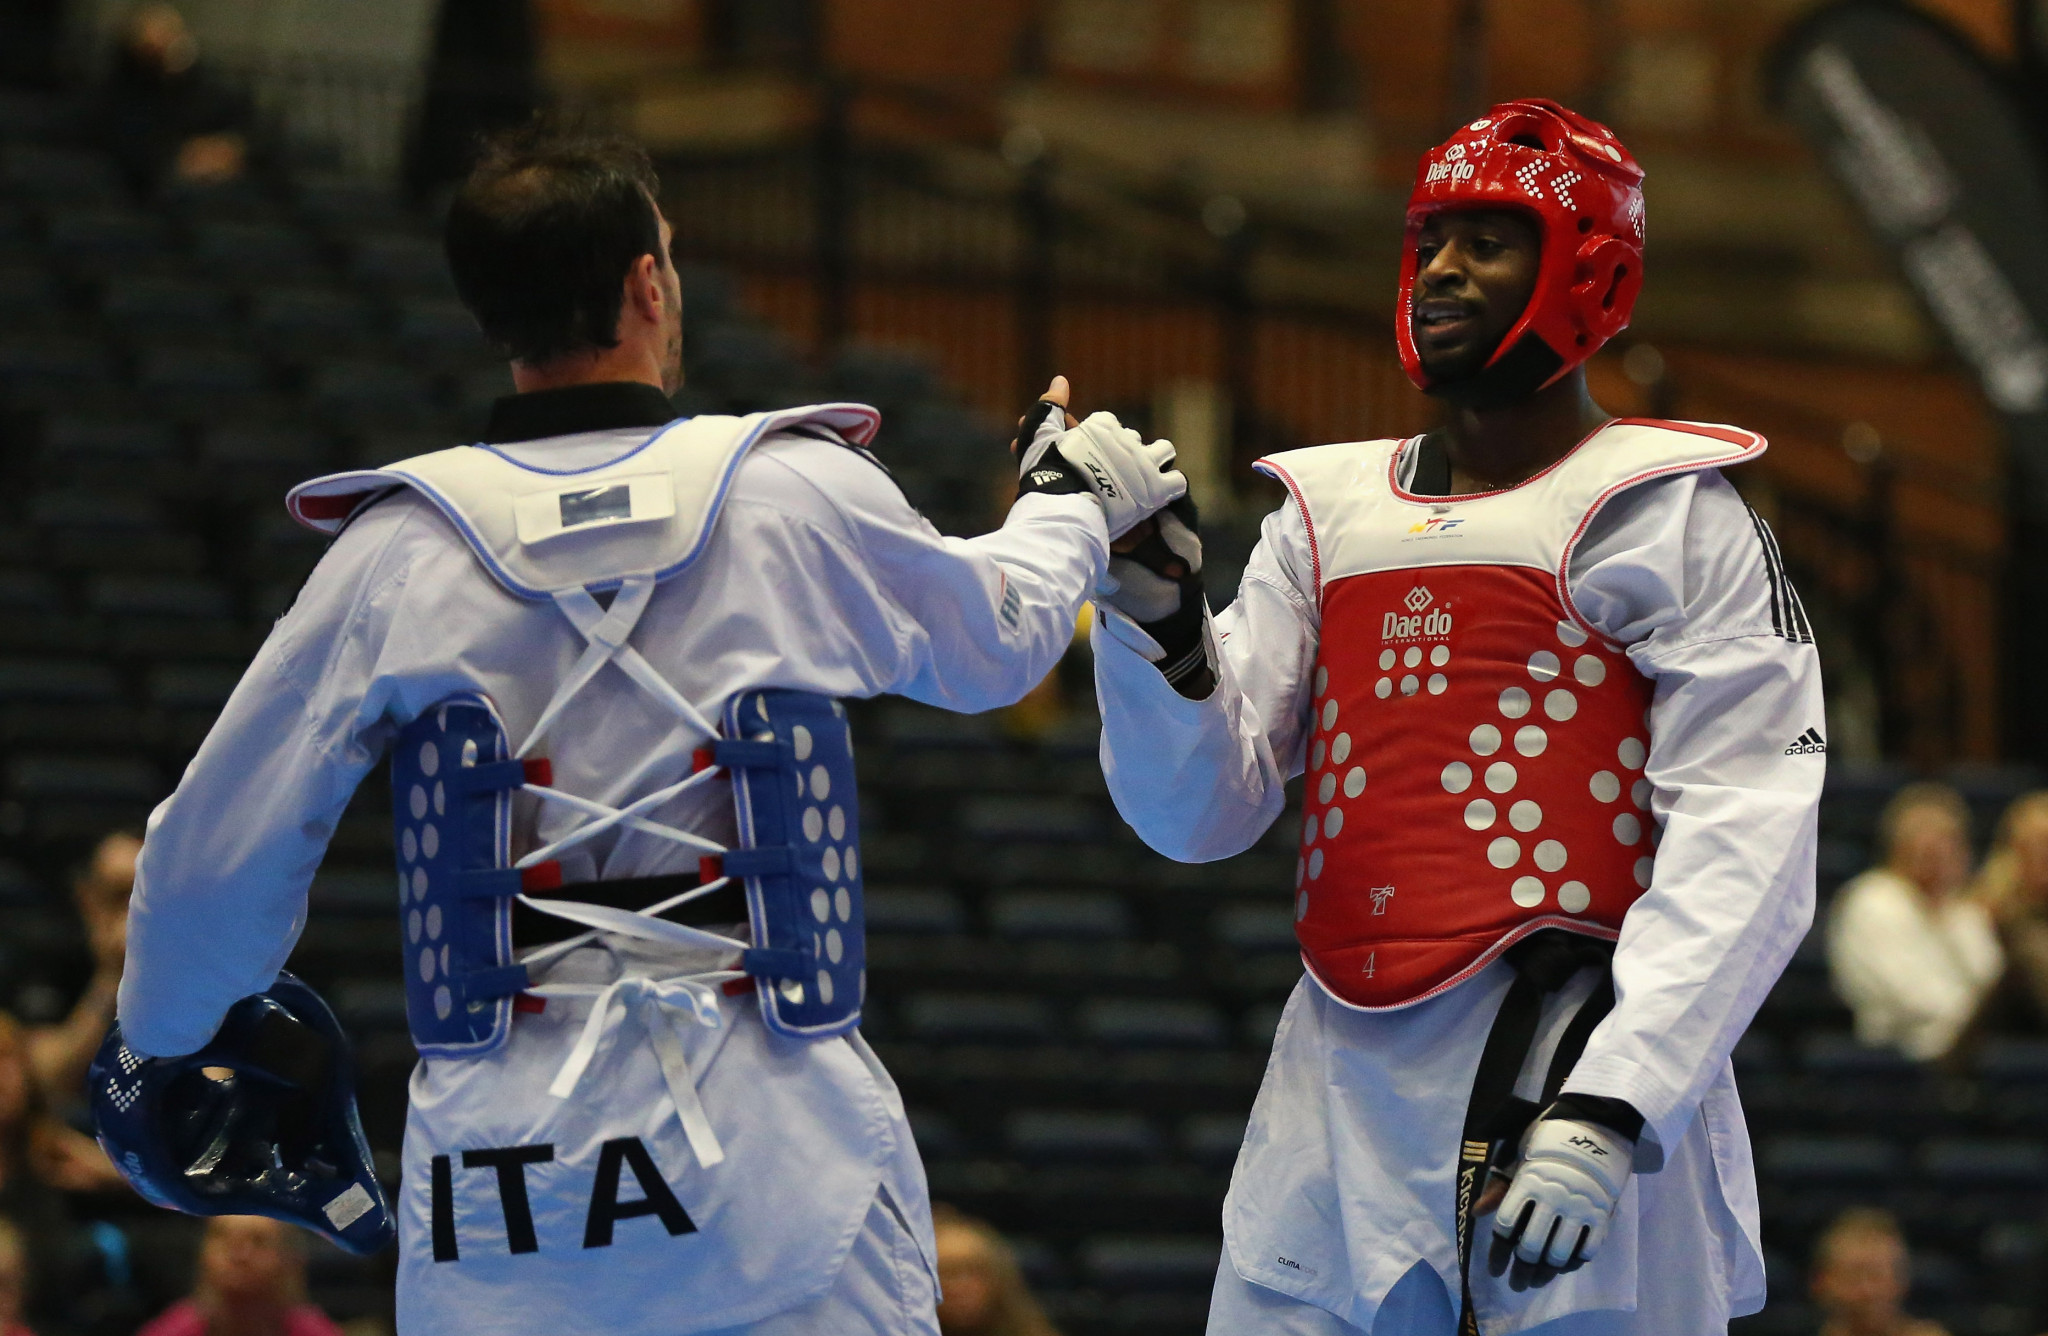 World Taekwondo works to contribute to the success of the Olympic Movement, and champions values such as education, friendship and fair play ©Getty Images